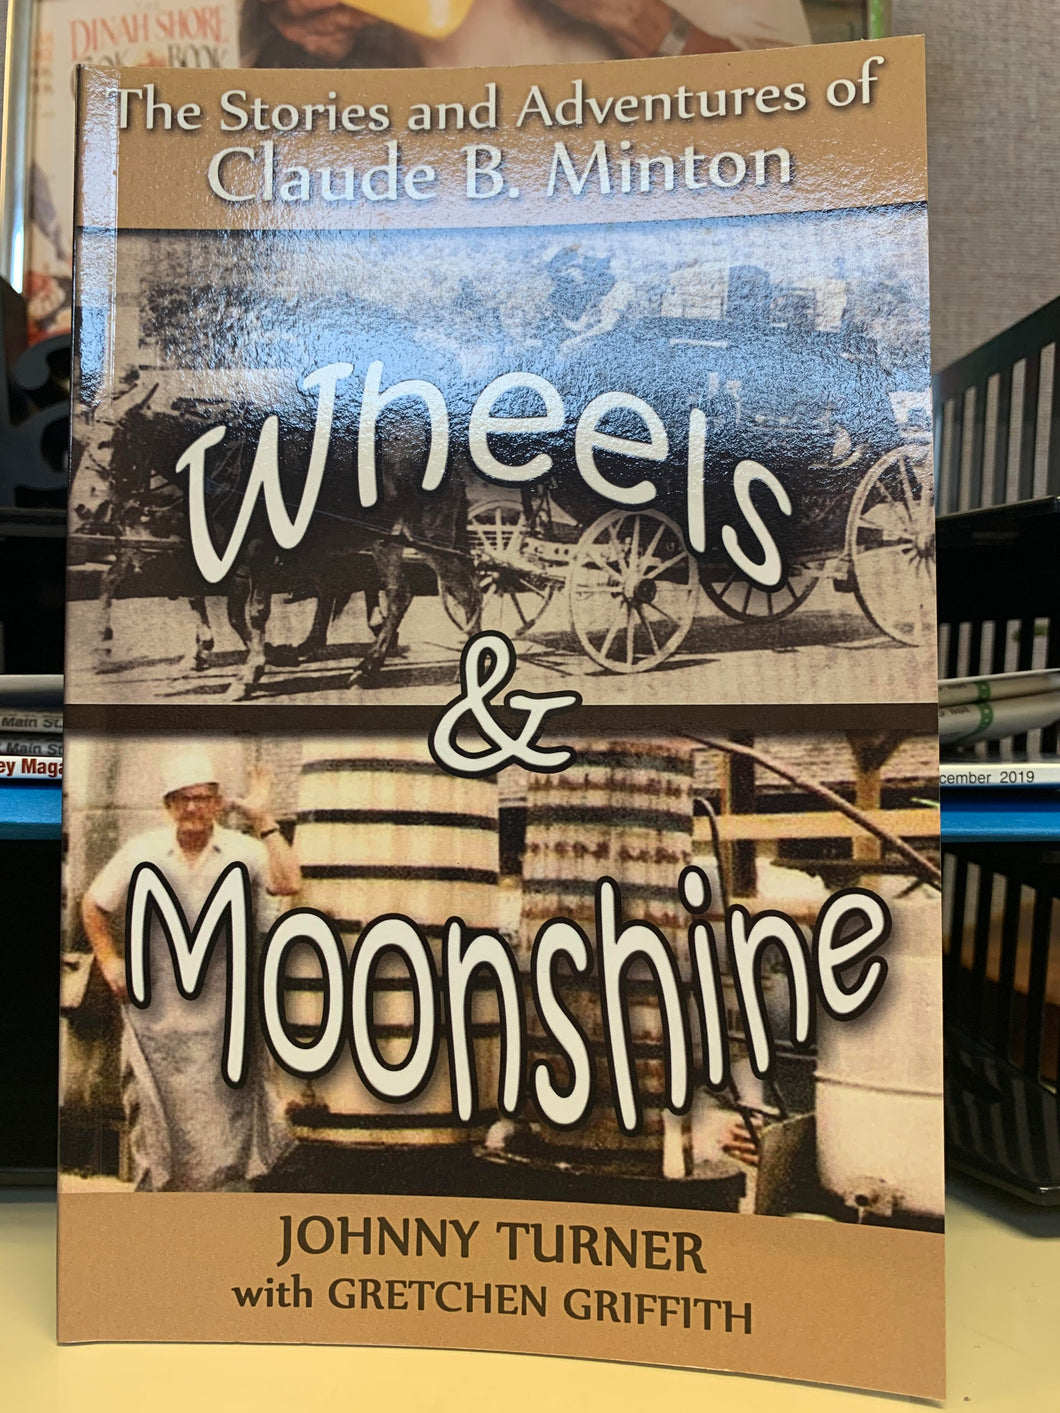 Wheels & Moonshine: The Stories and Adventures of Claude B. Minton by Johnny Turner